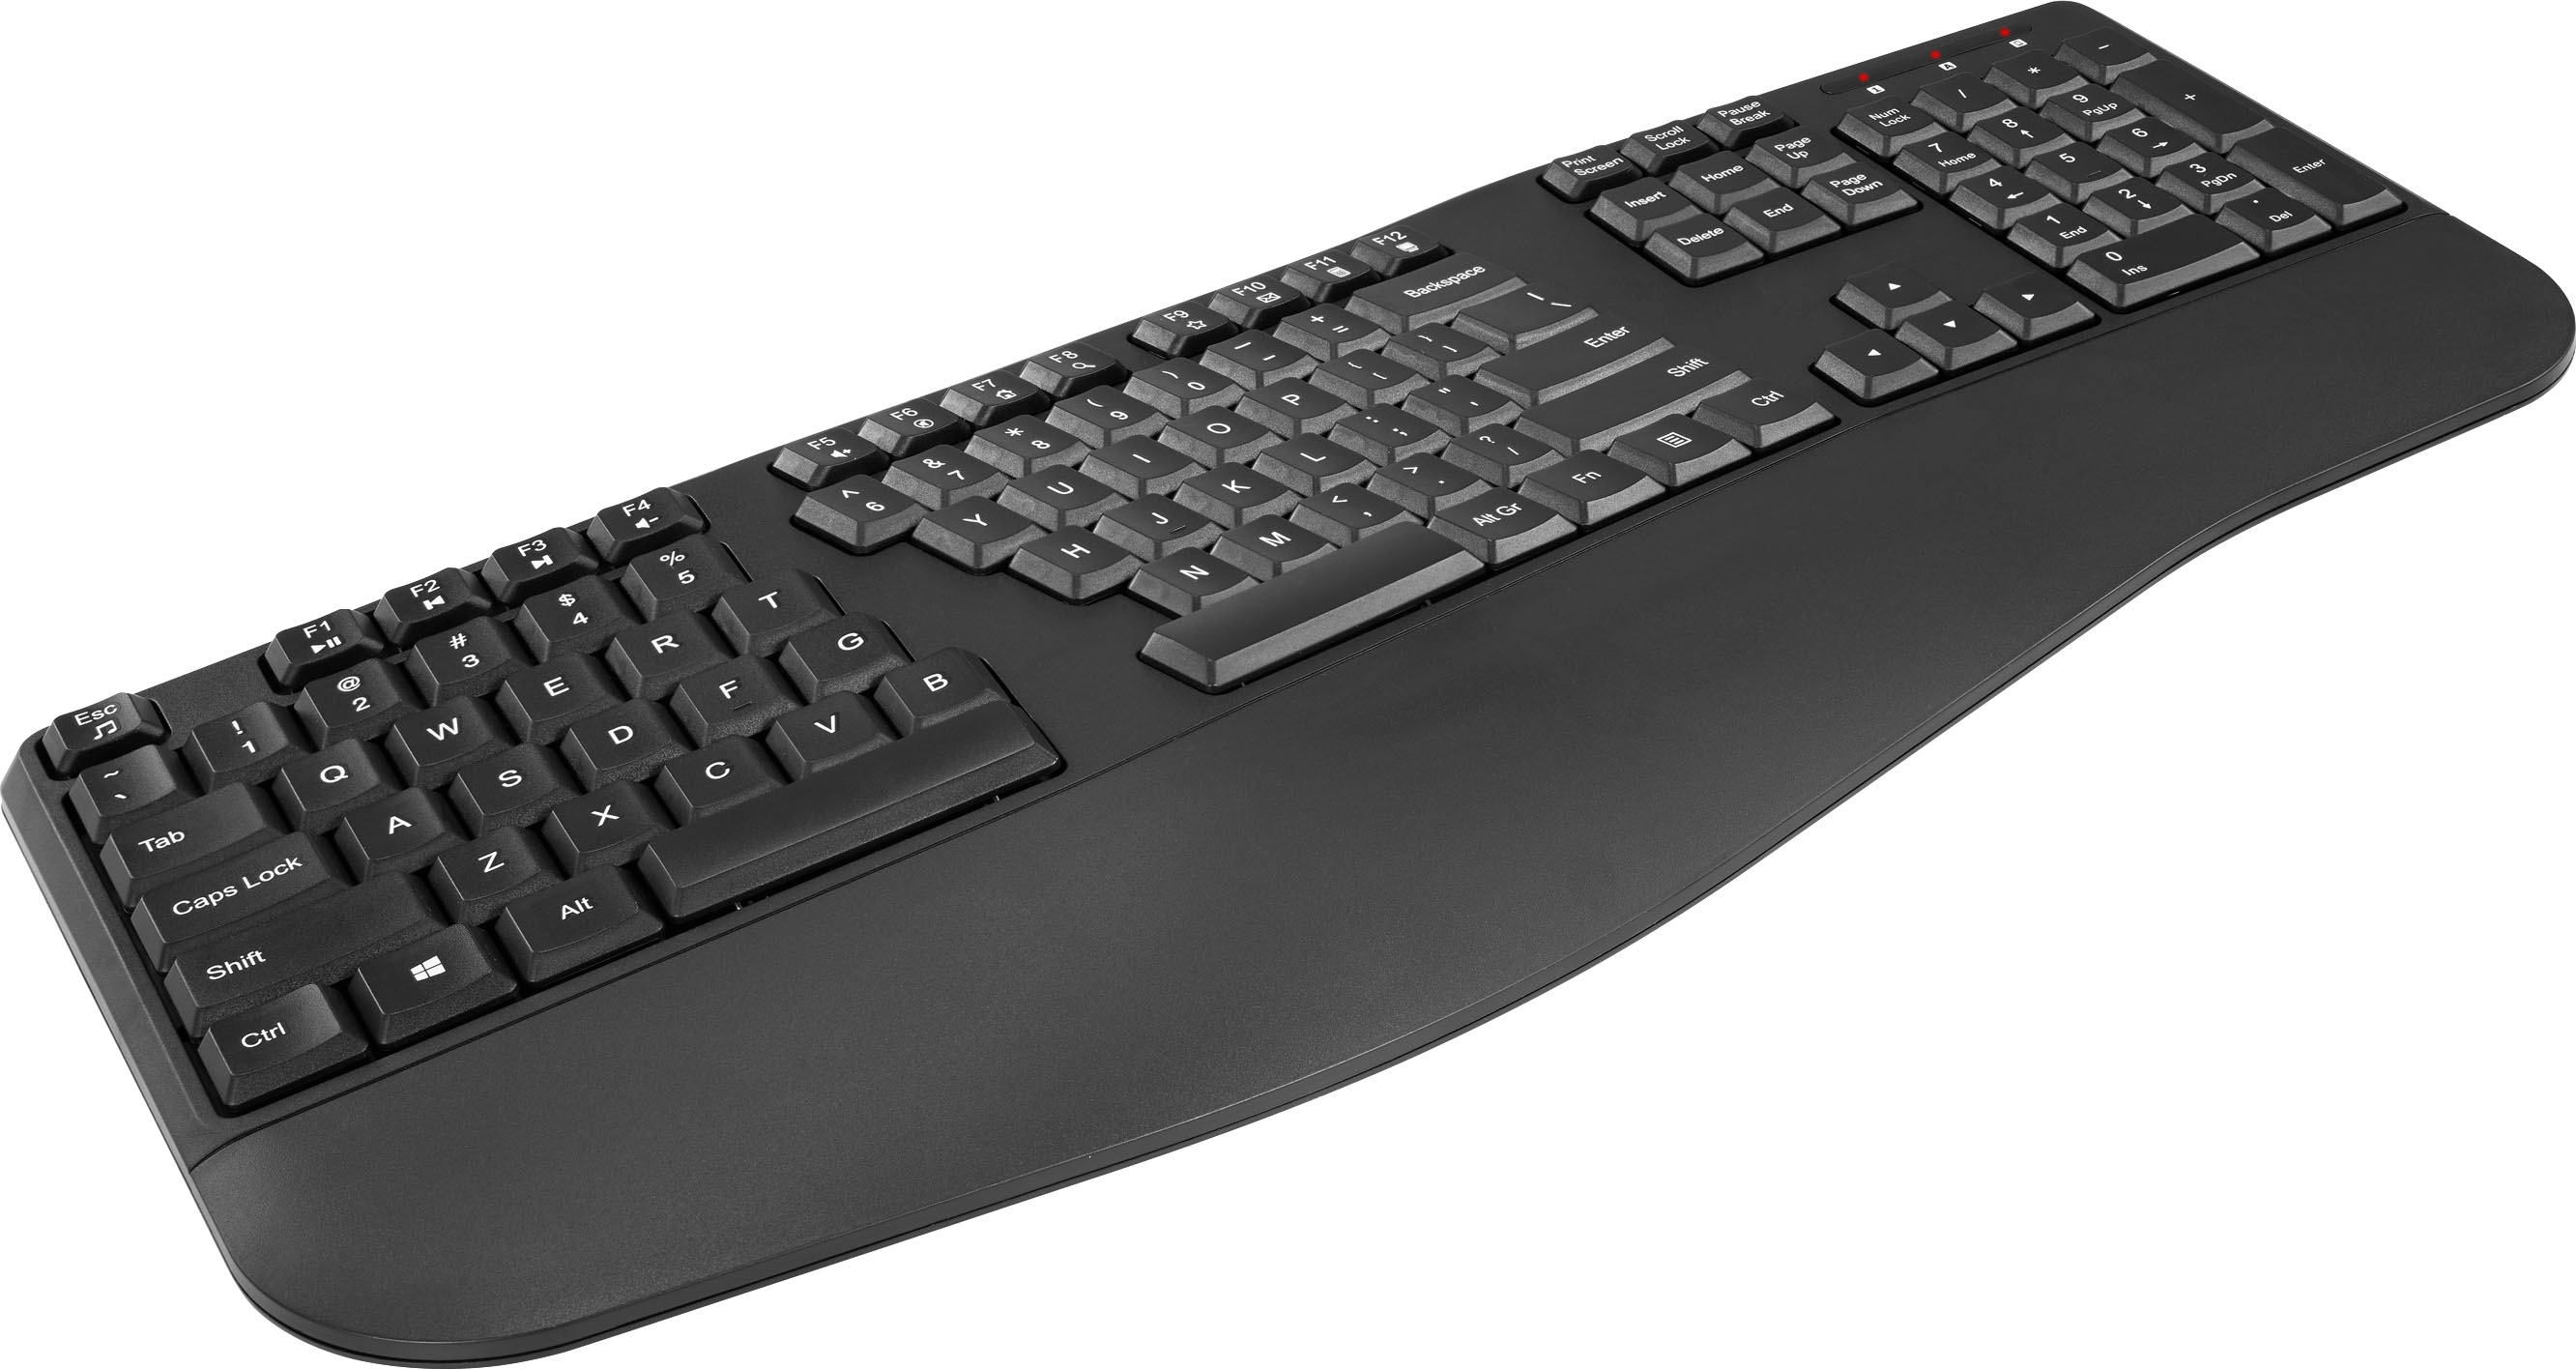 Angle View: Logitech - K950 Signature Slim Full-size Wireless Keyboard for Windows and Mac with Quiet Typing - Off-White